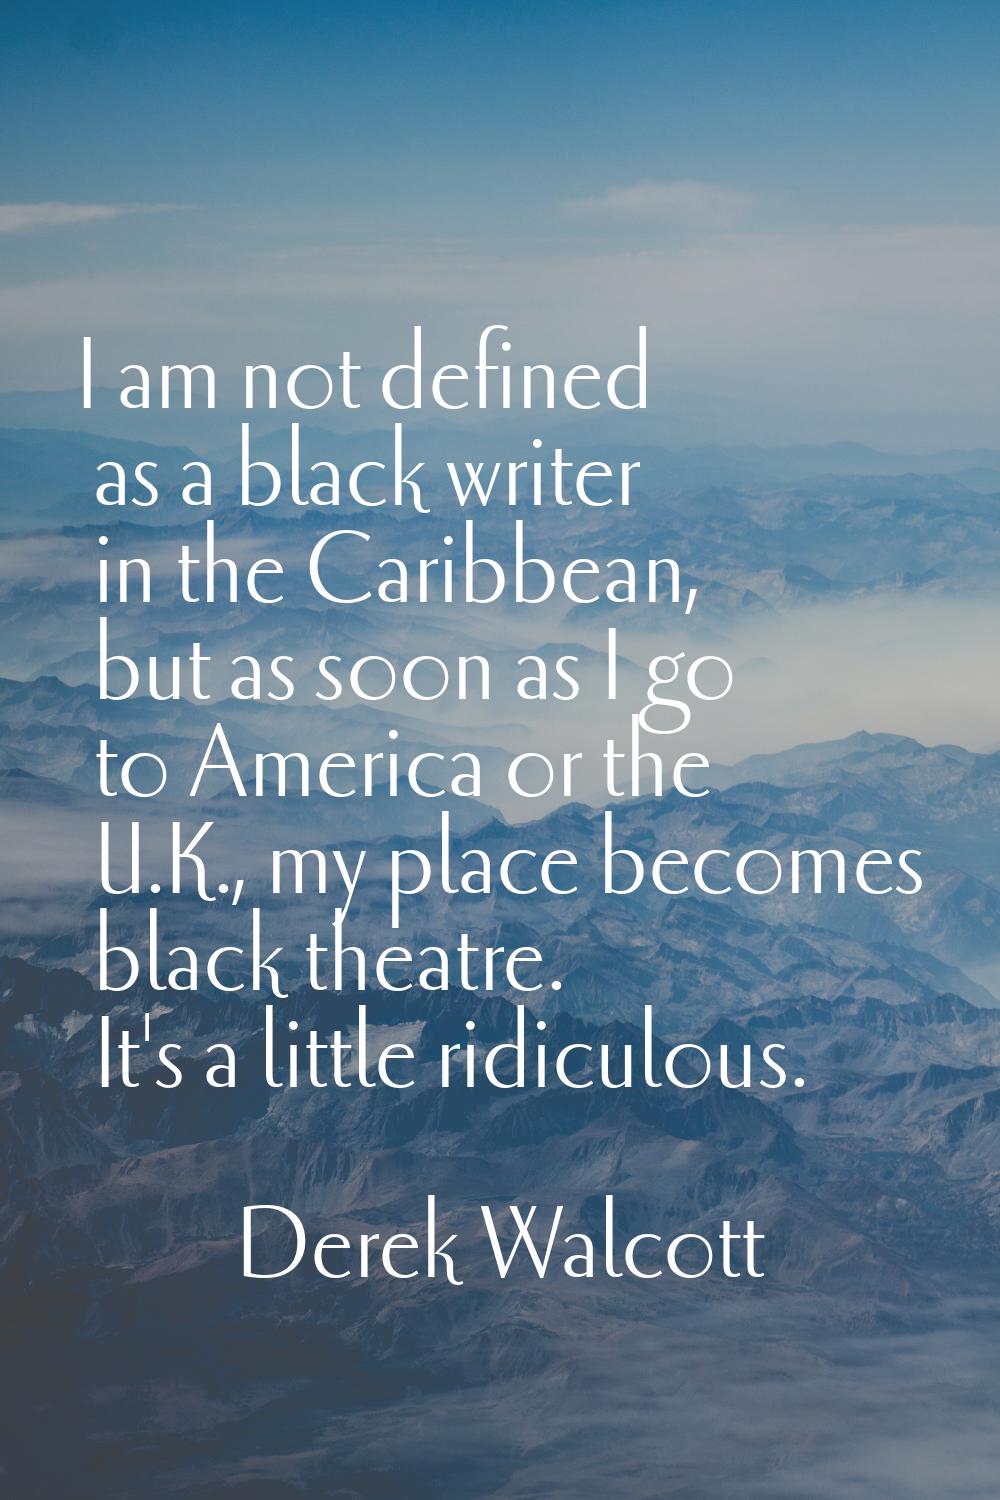 I am not defined as a black writer in the Caribbean, but as soon as I go to America or the U.K., my